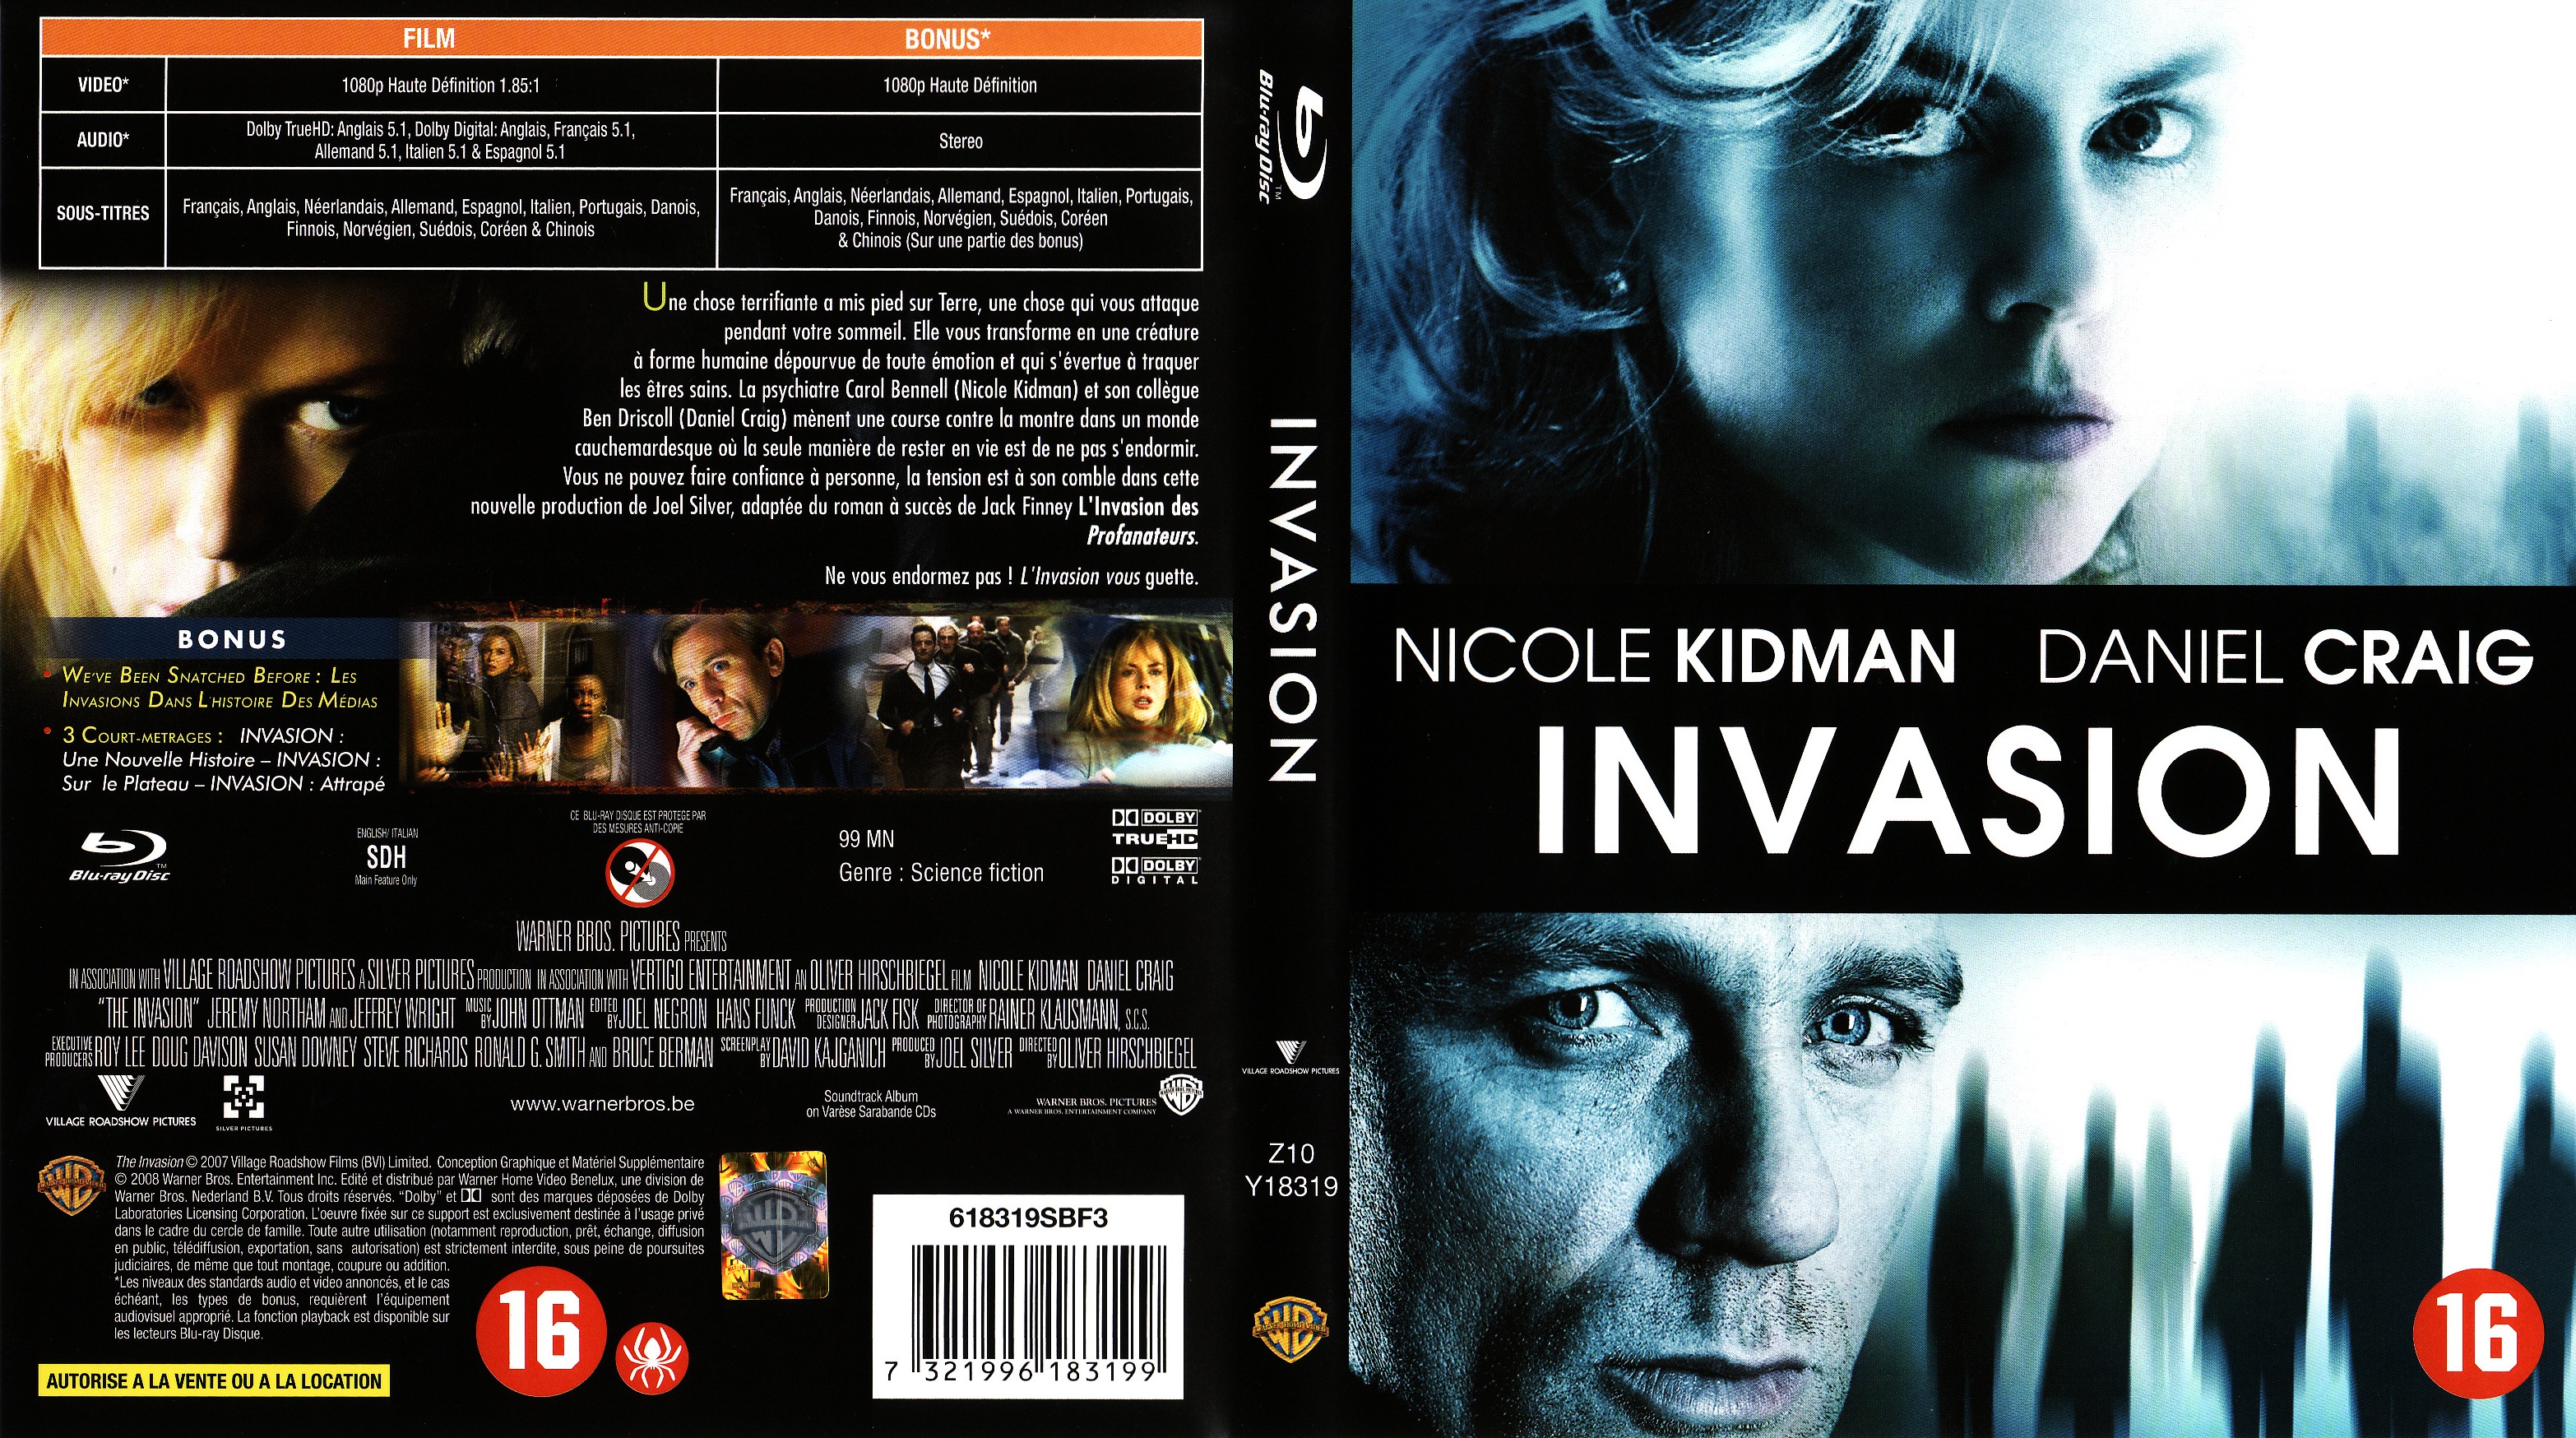 Jaquette DVD Invasion (BLU-RAY)